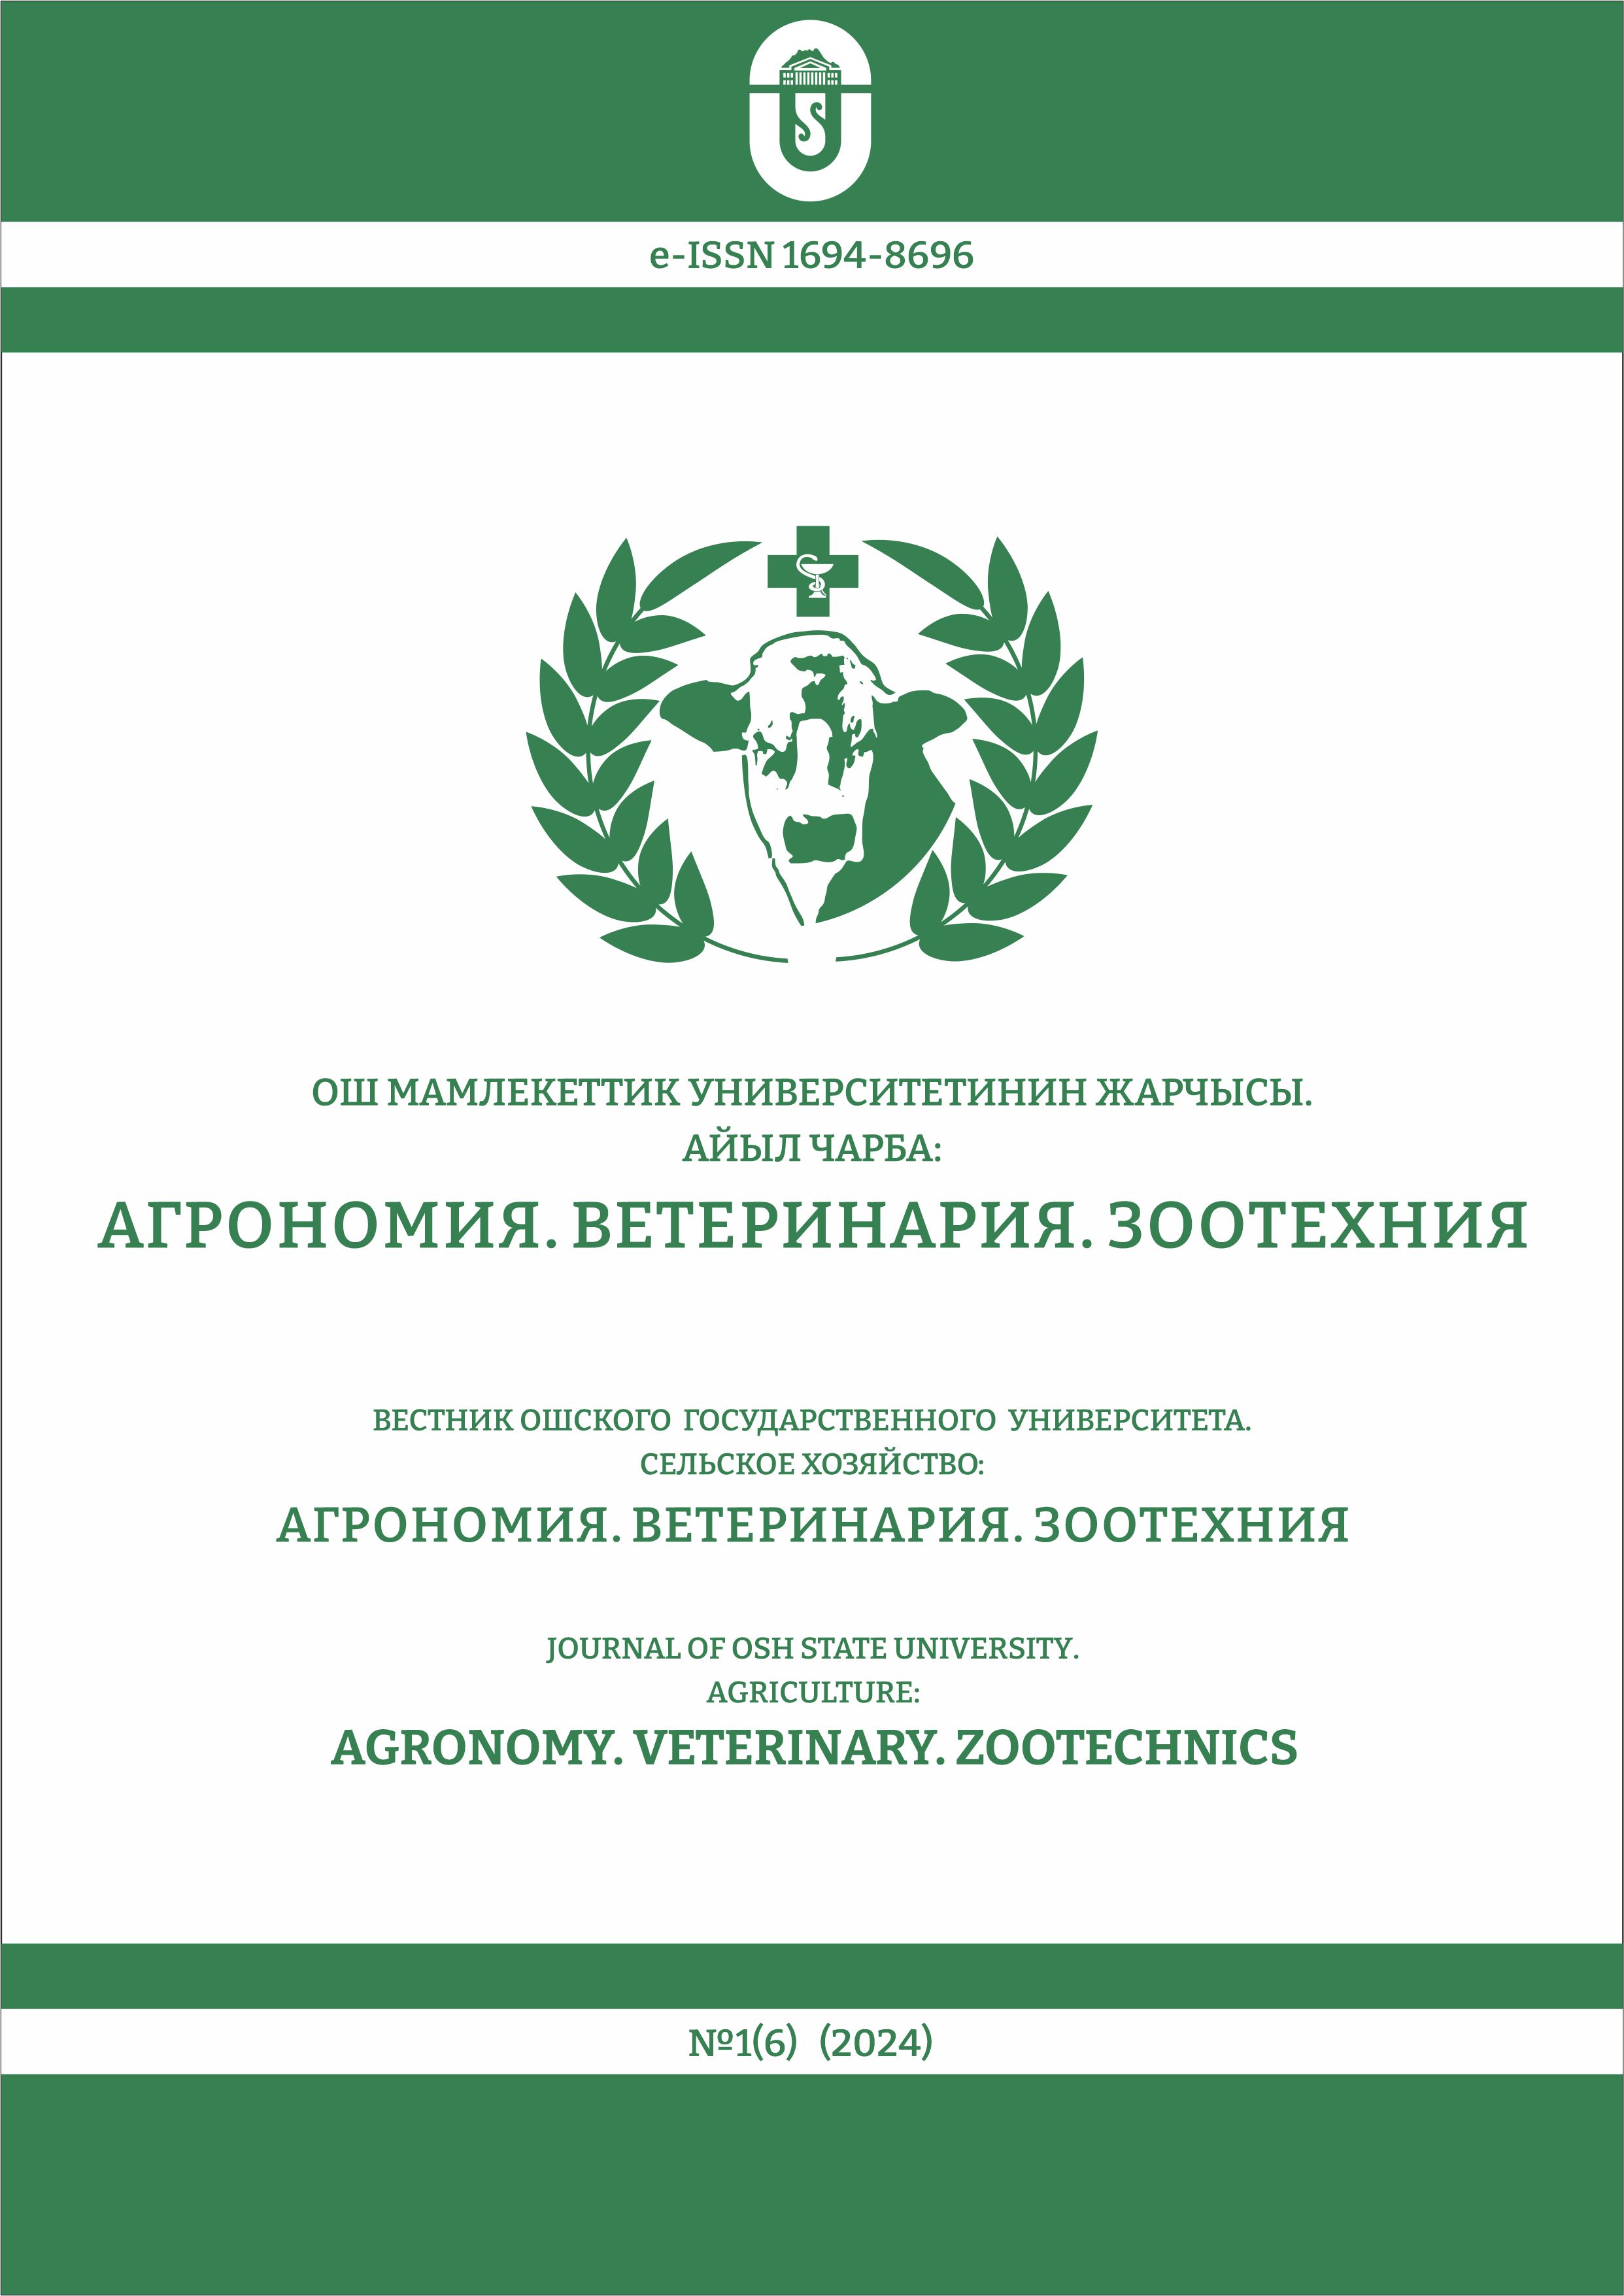 					View No. 1(6) (2024): Journal of Osh State University. Agriculture: agronomy, veterinary and zootechnics
				